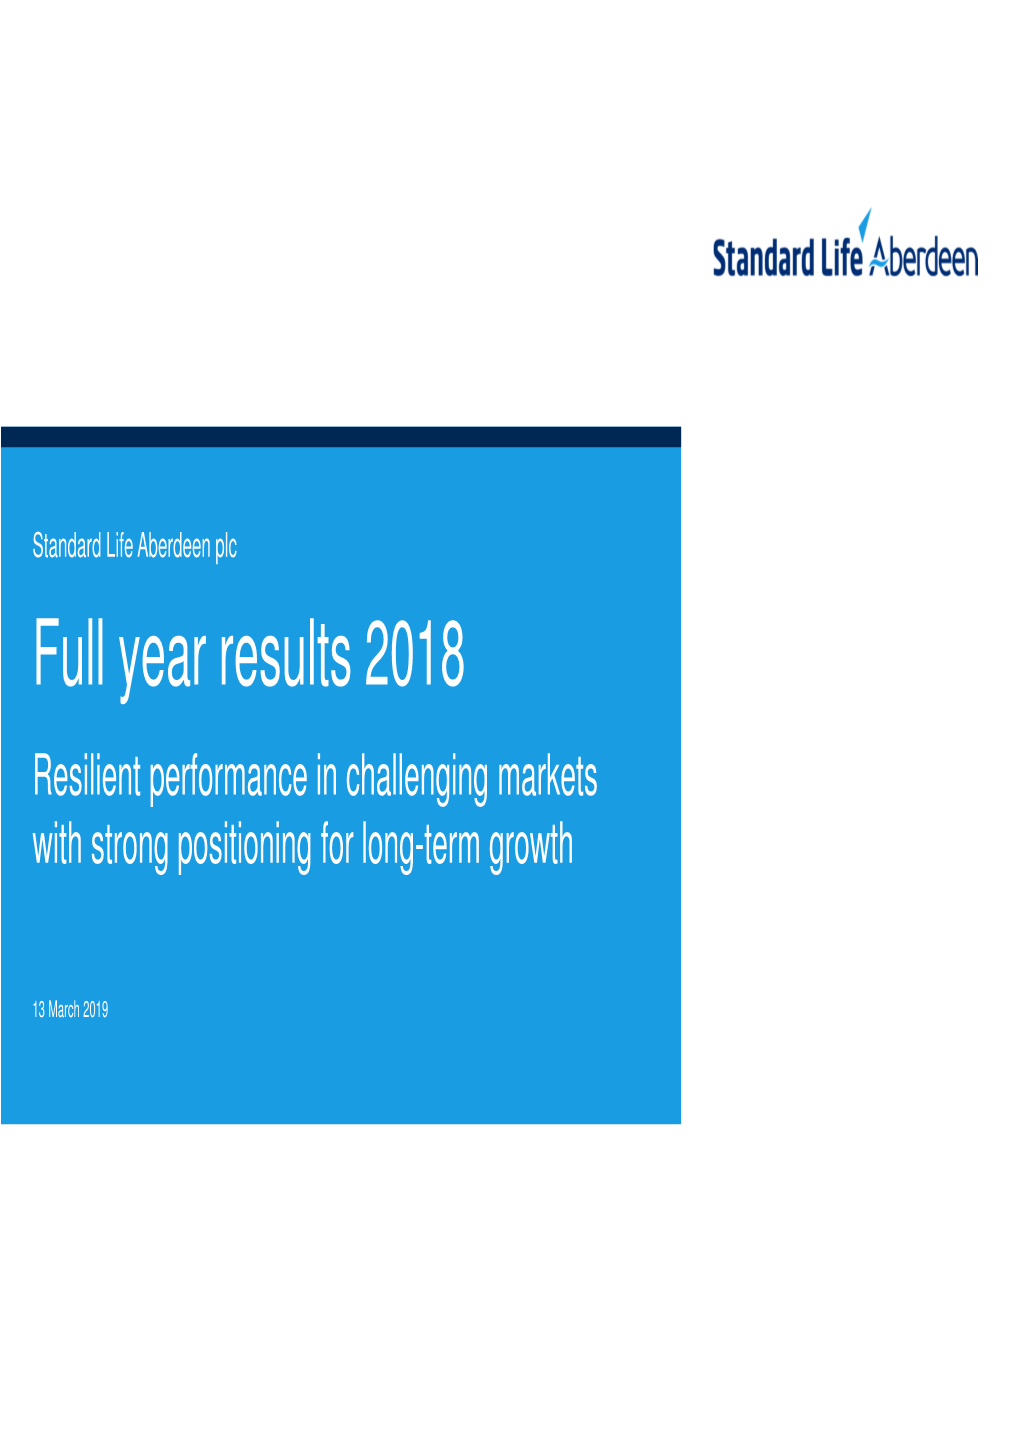 Full Year Results 2018 Resilient Performance in Challenging Markets with Strong Positioning for Long-Term Growth